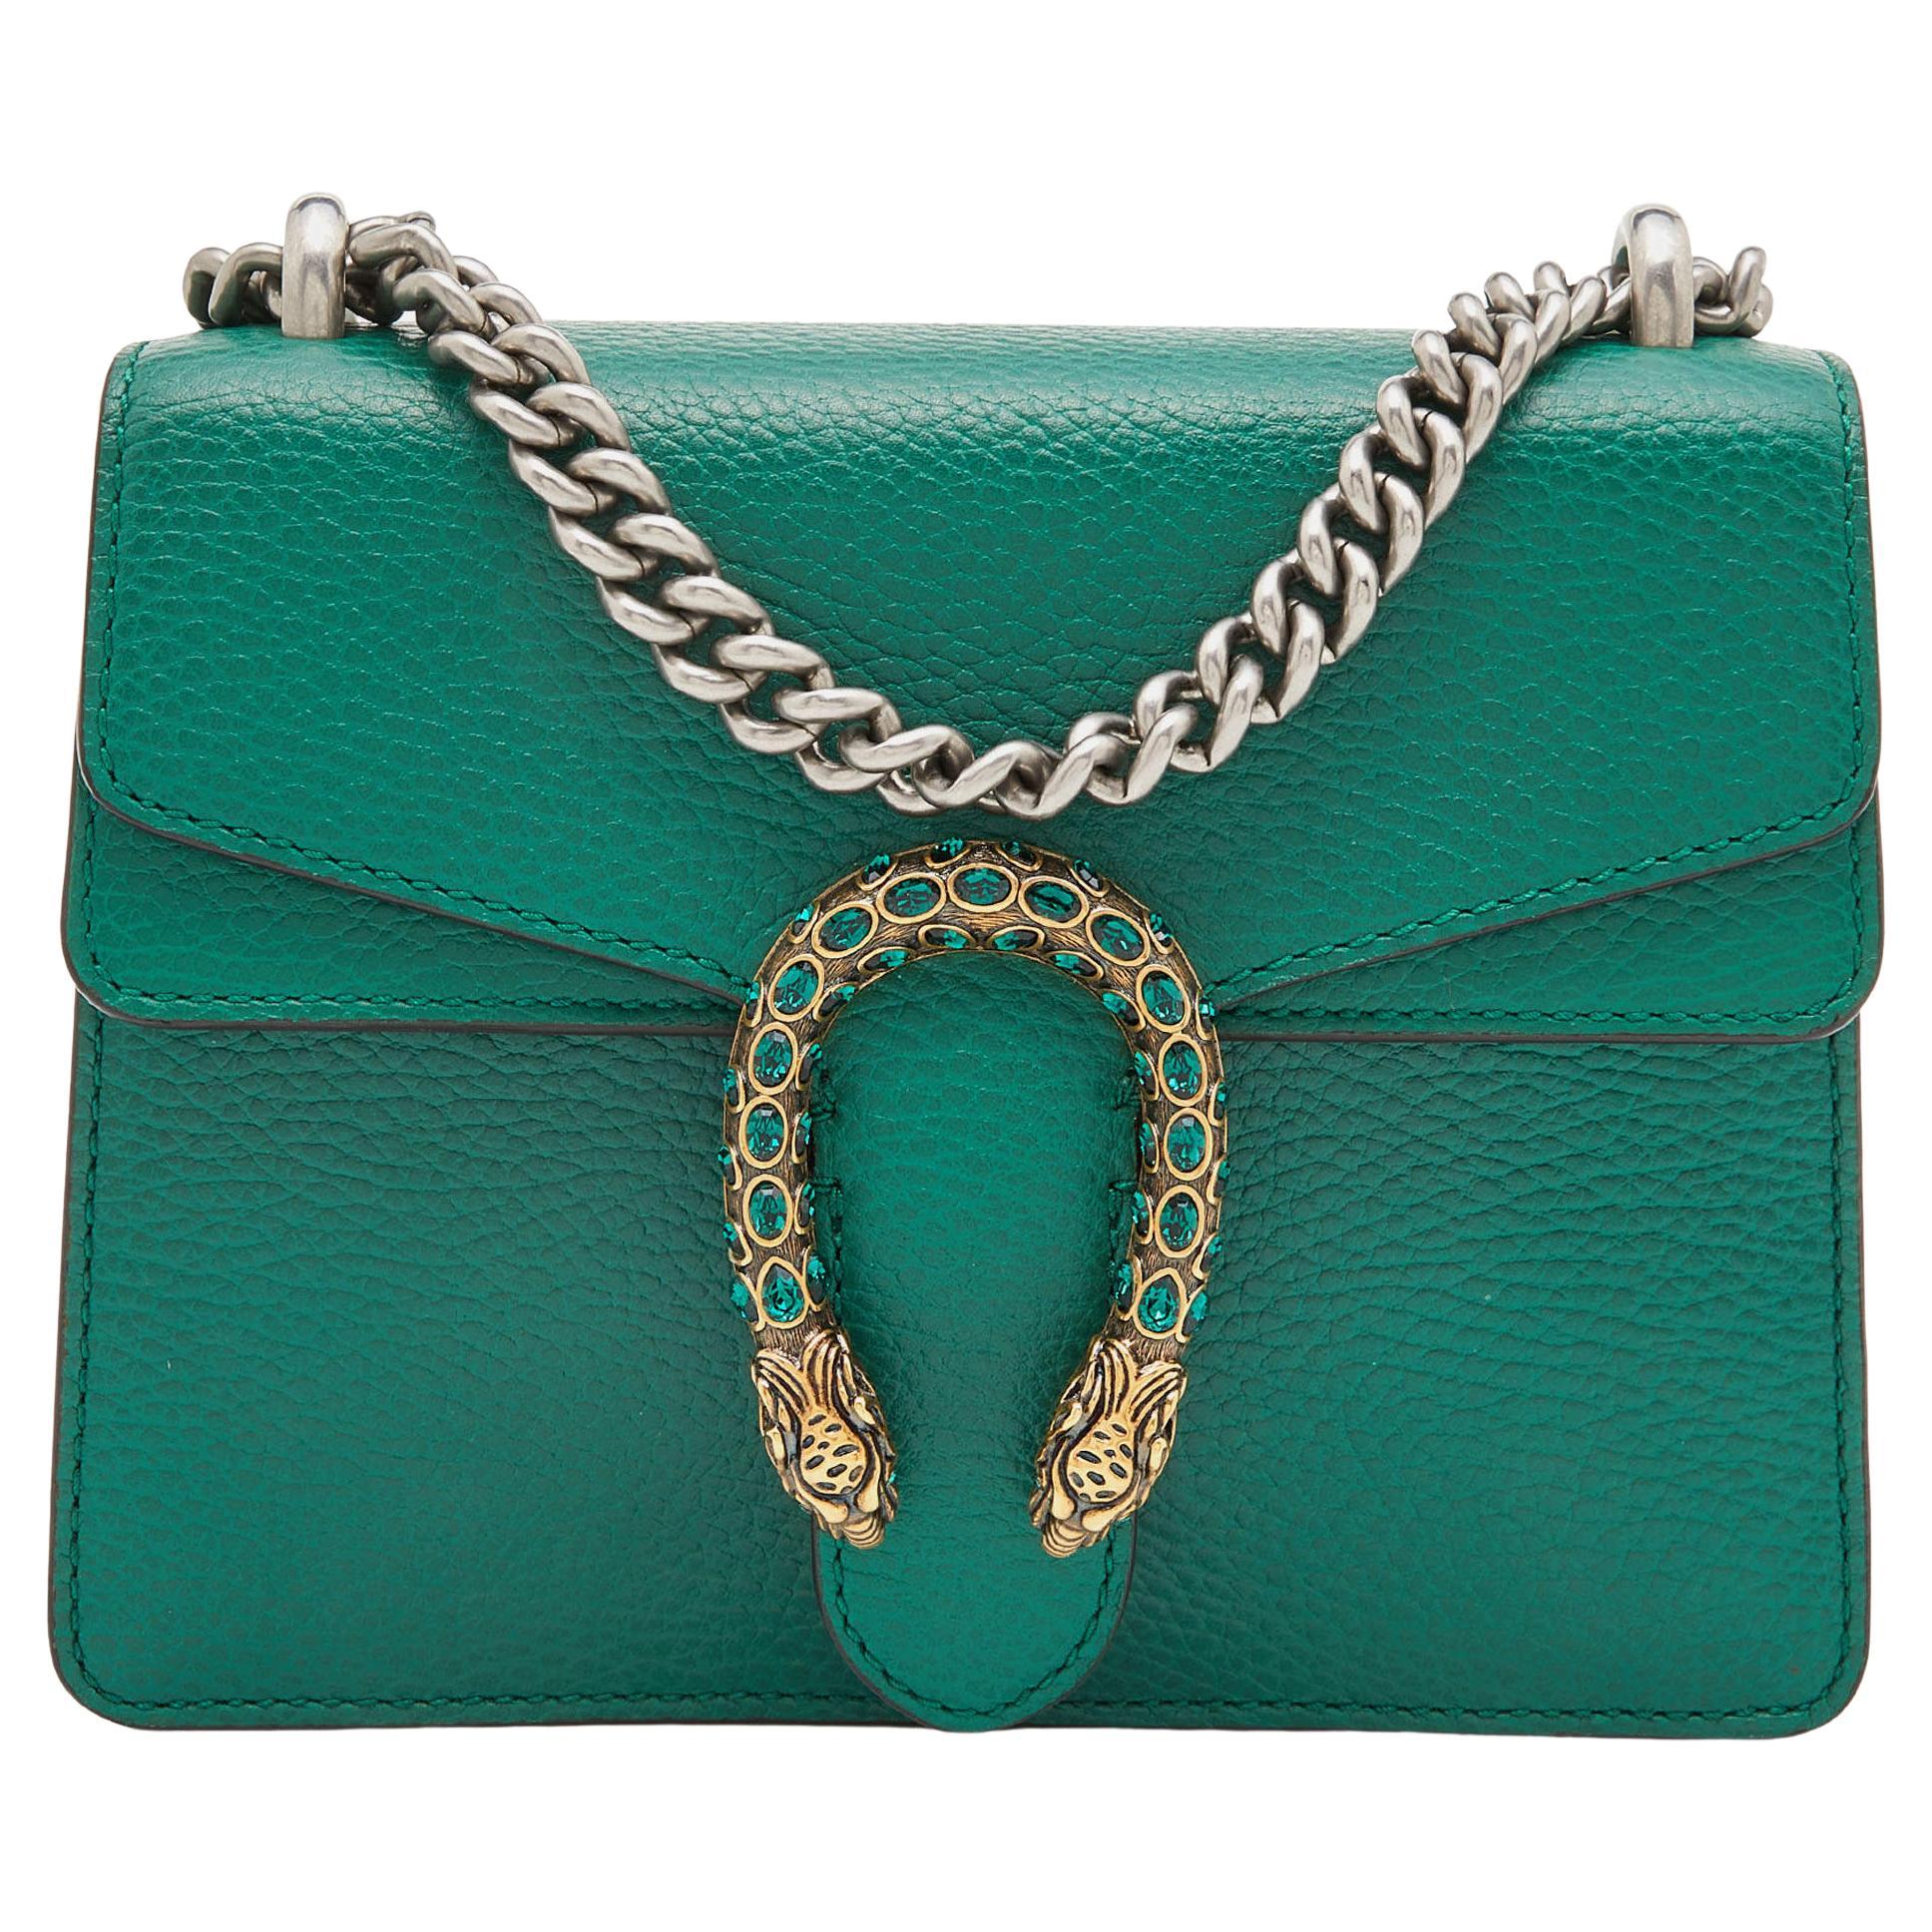 Gucci, Bags, New Gucci Dionysus Chain Wallet Mini Woc Leather Green Bag